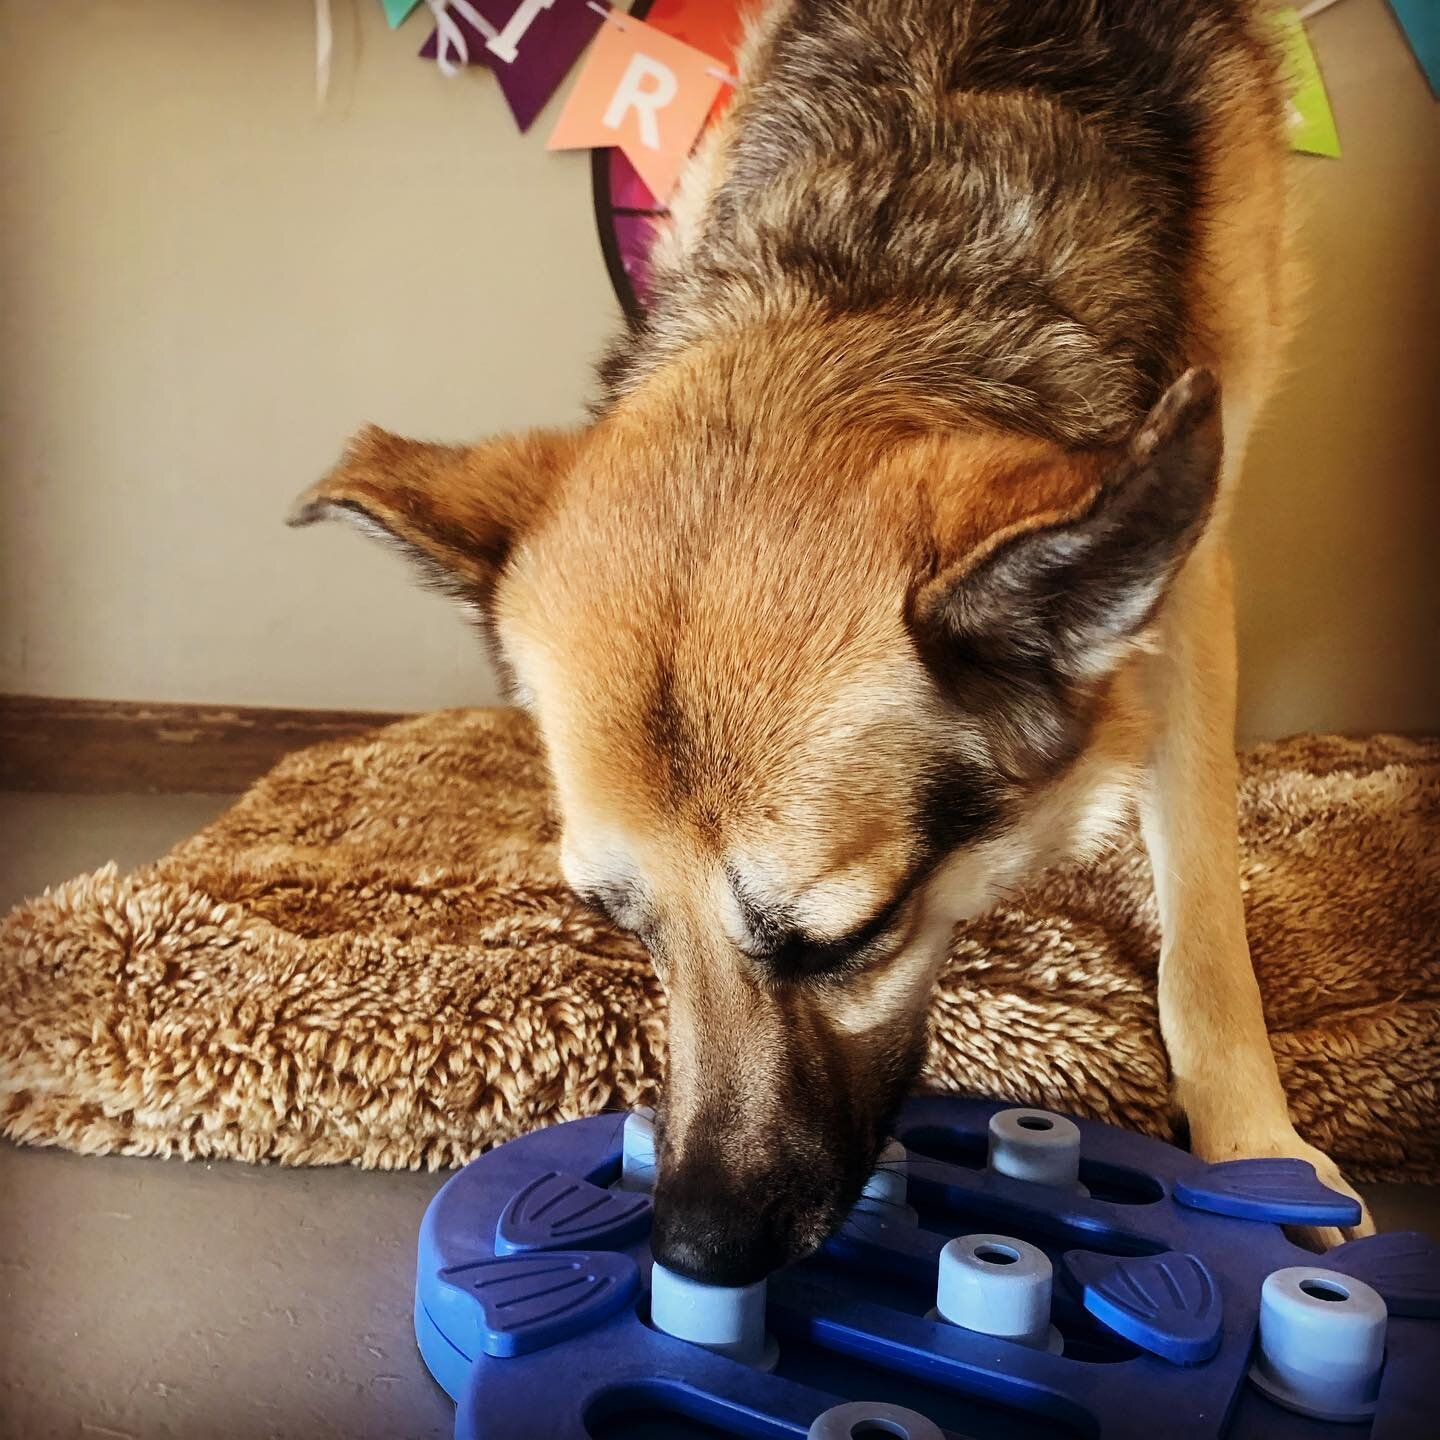 Thistle working the new puzzle, such a smart girl!  #peacelovepetcare #dogpuzzle #dogsofinstagram #steamboatdogs #smartdogs #keepdogshappy